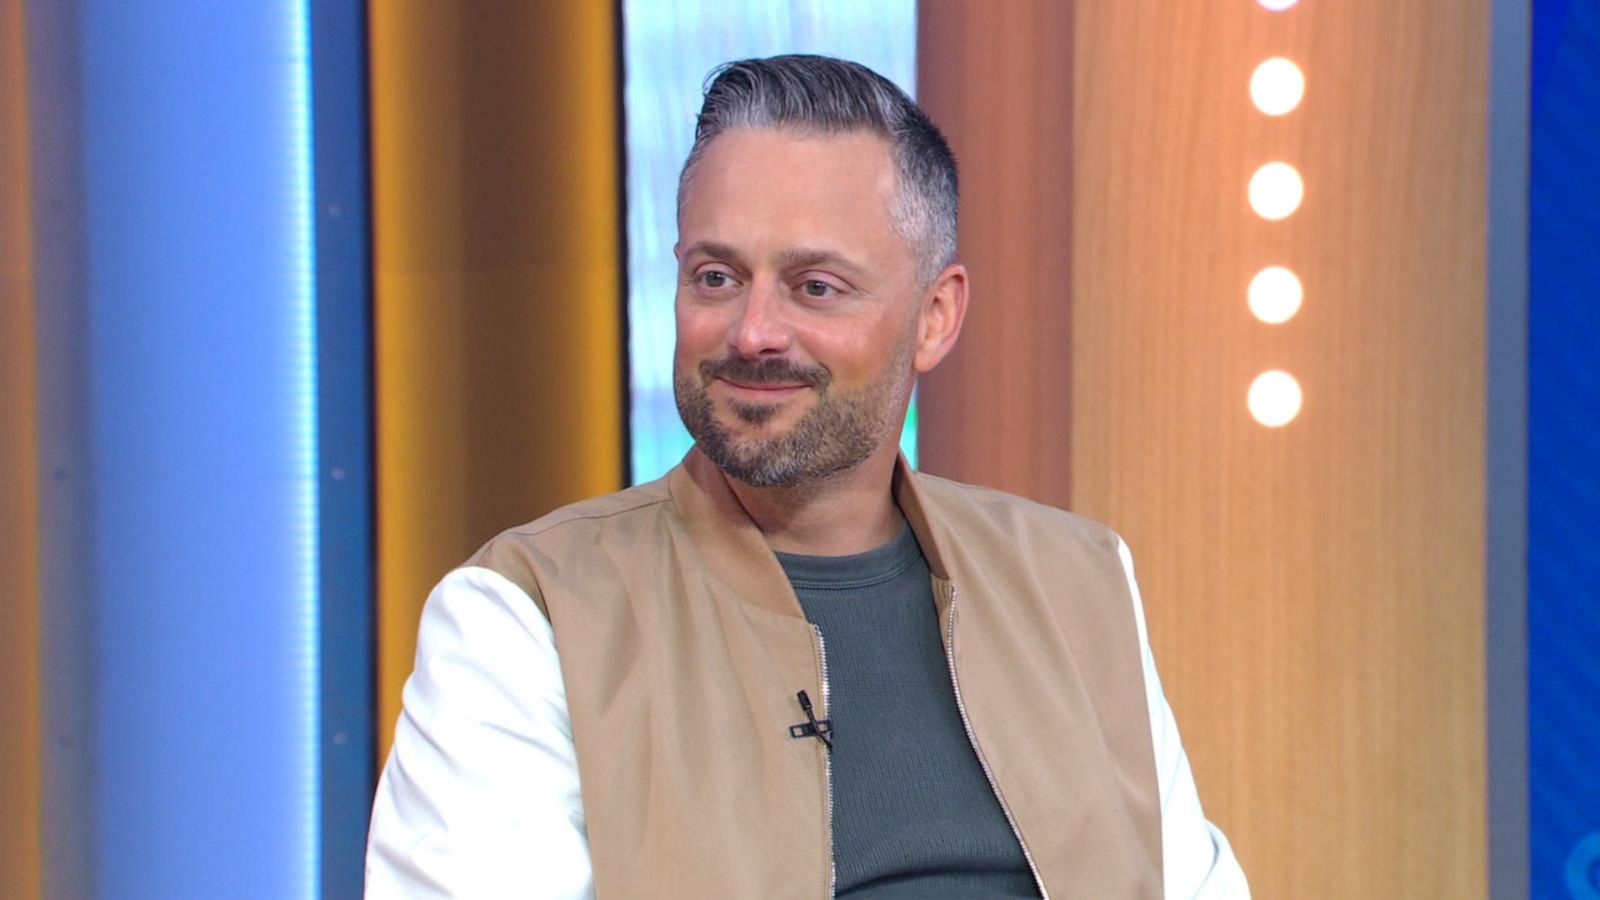 Nate Bargatze talks about his new comedy special Good Morning America